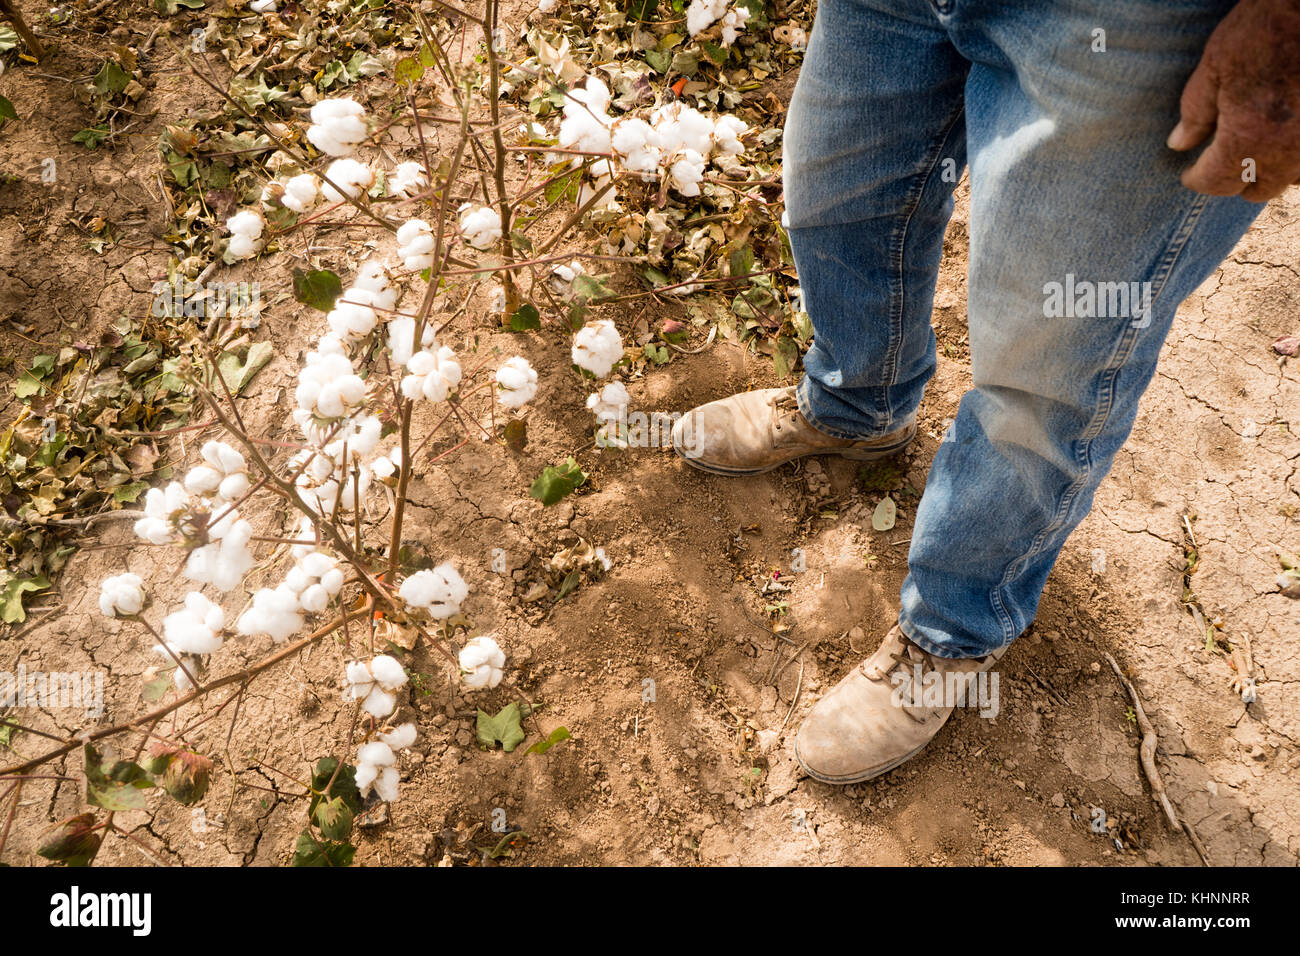 Farmer in work boots stands checking cotton plants before harvest Stock Photo